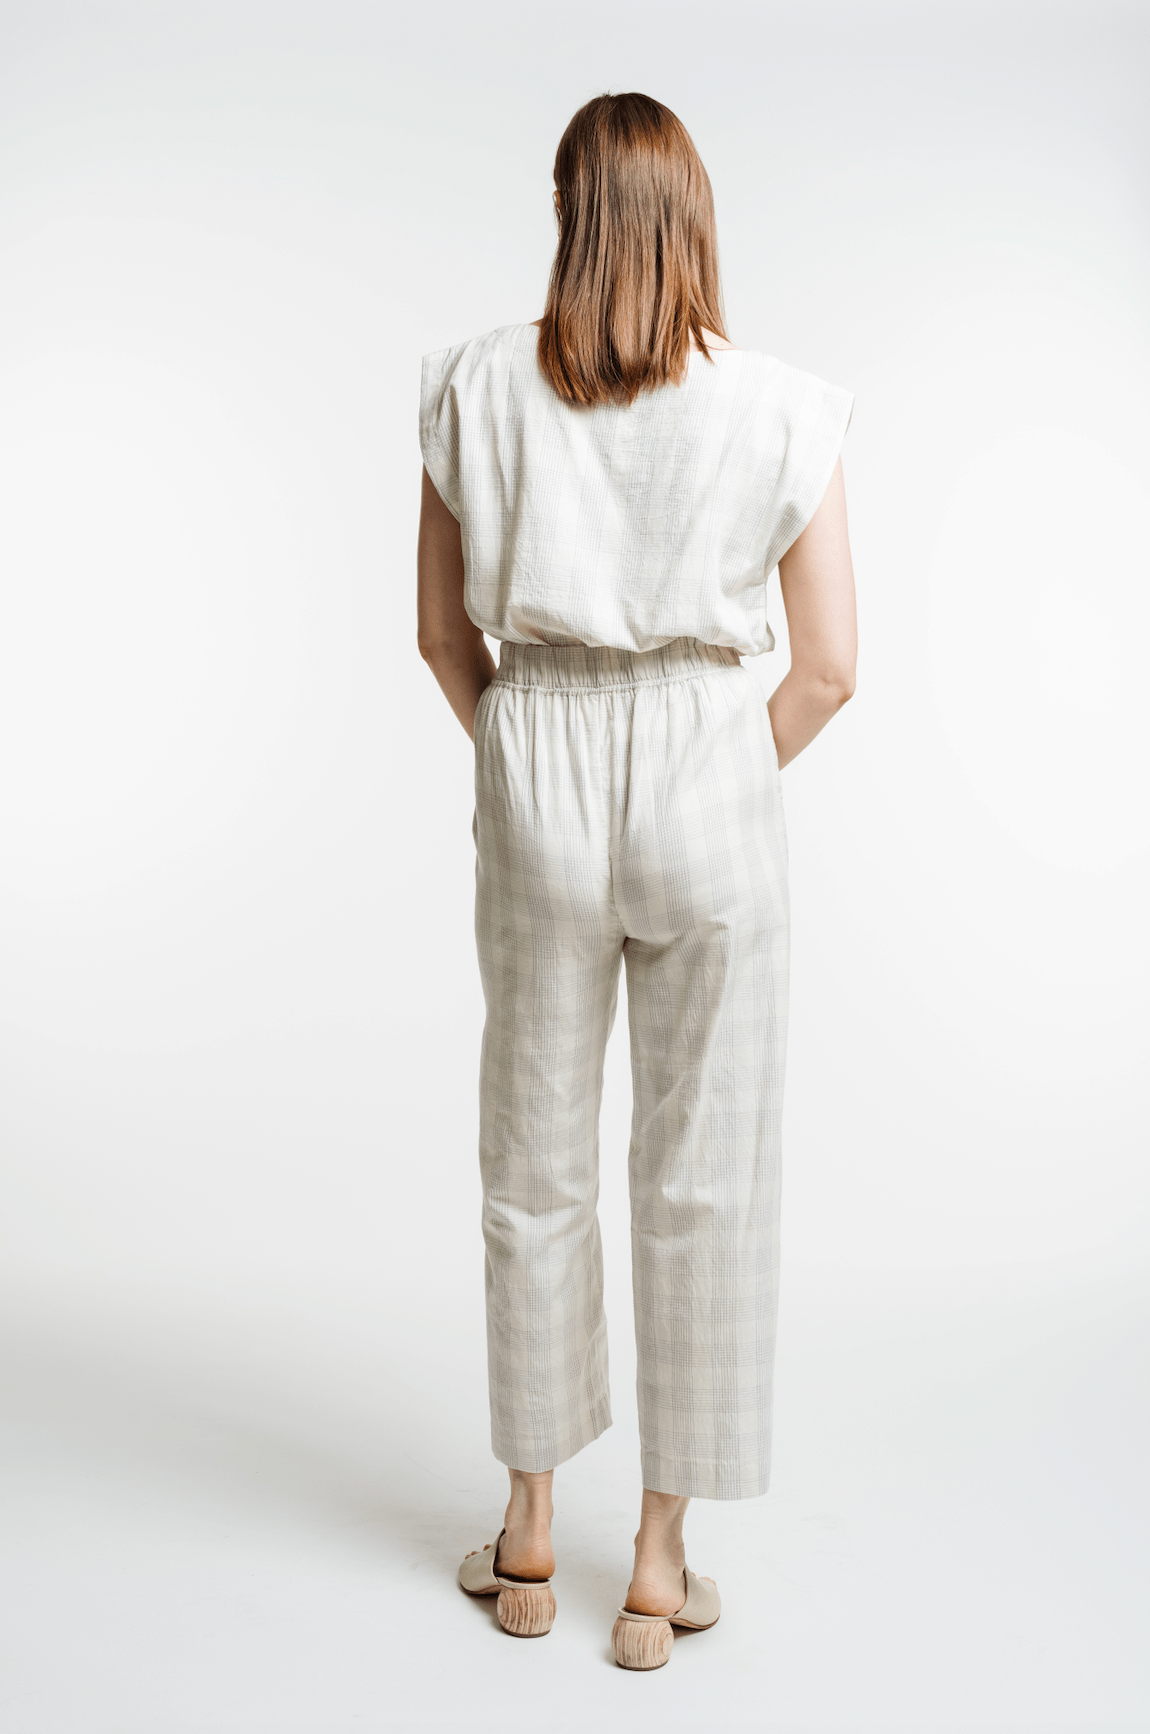 The back view of a woman wearing the Everyday Crop Pant - Rivera Plaid jumpsuit.